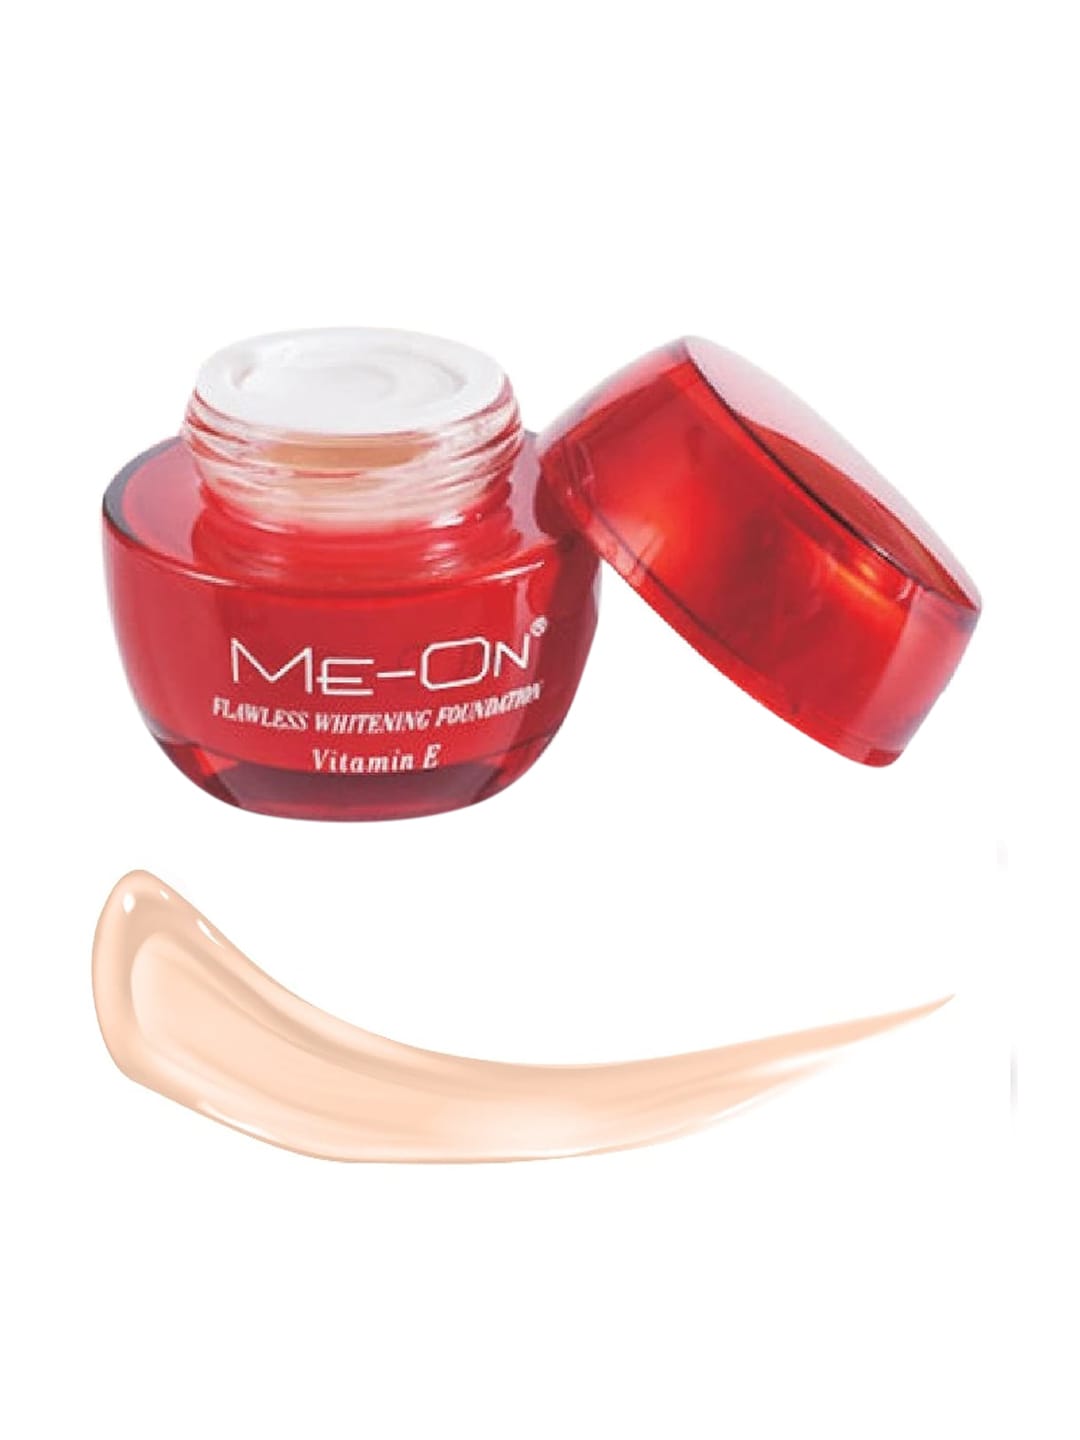 ME-ON Whitening Foundation-21 Natural Beige 50G Price in India